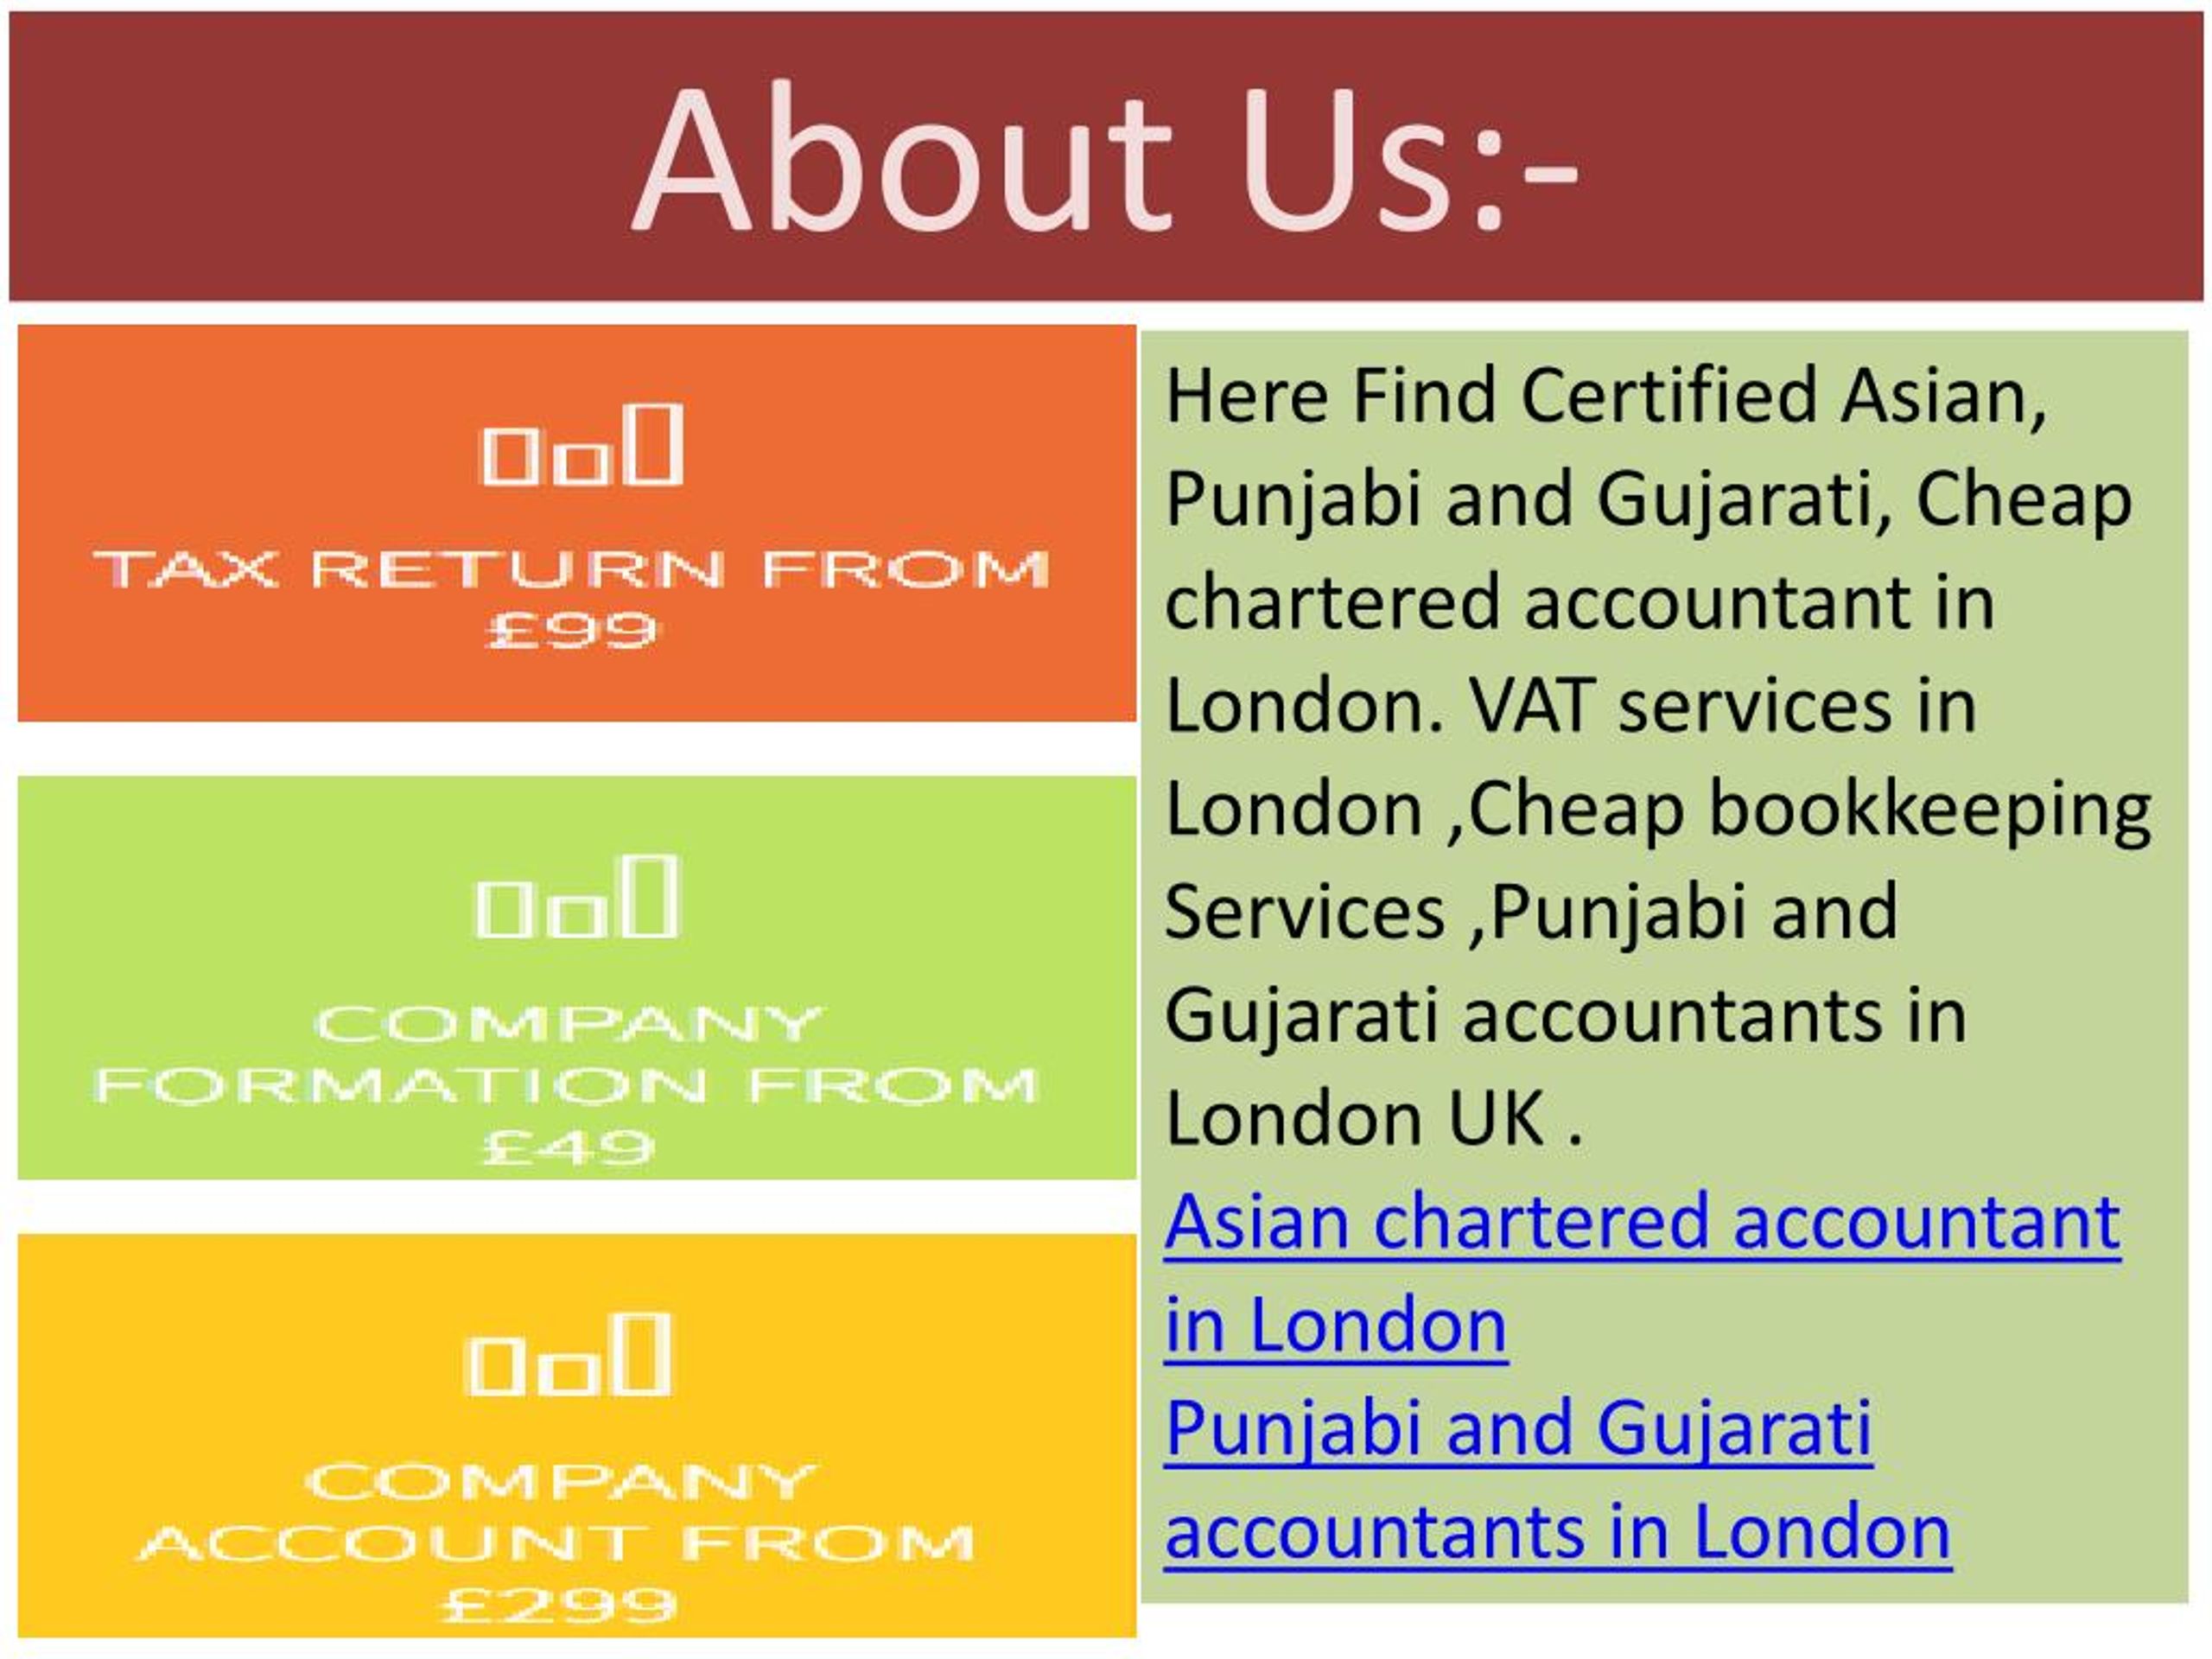 Independent Cheap Accountant Near Enfield Lock - reviews, photos, phone  number and address - Legal services in London - Nicelocal.co.uk